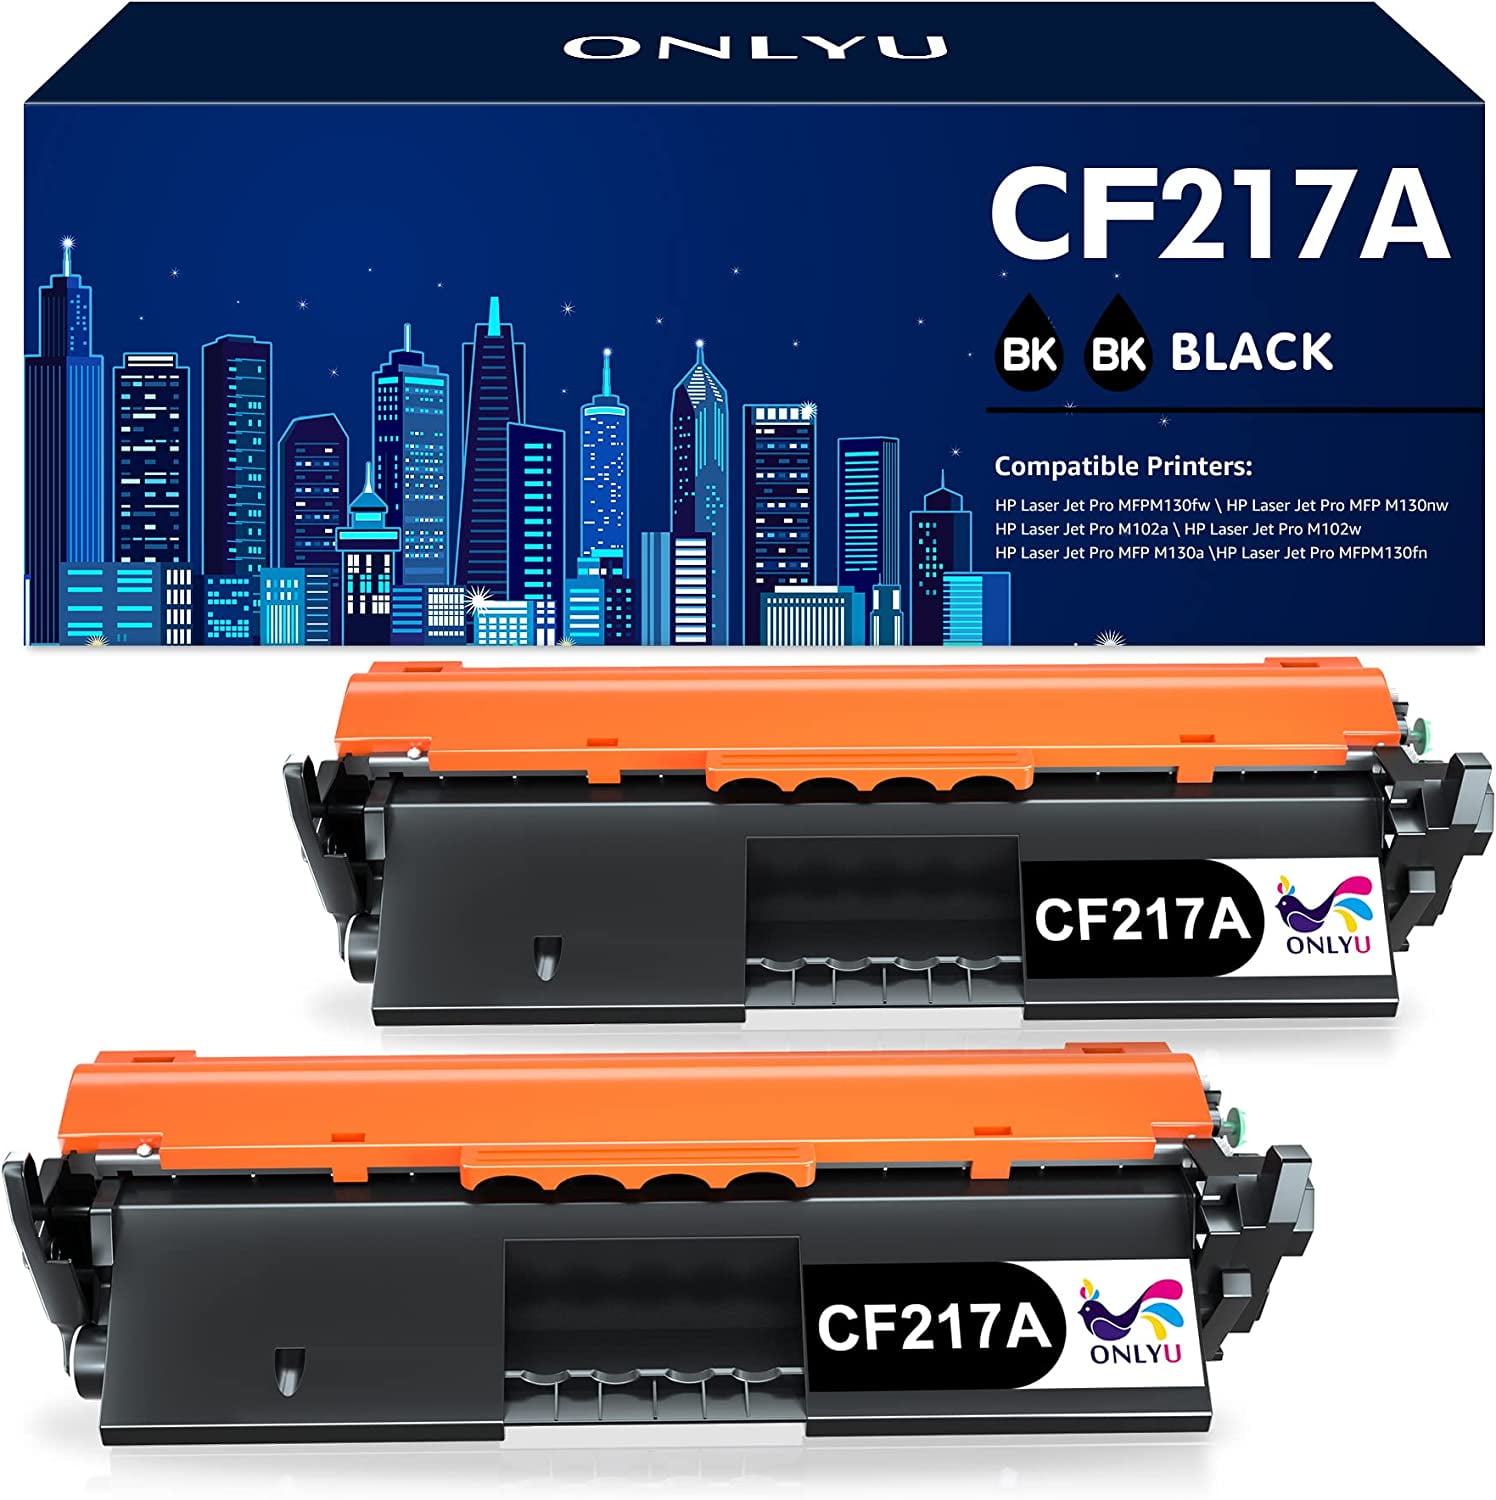 hænge Opdatering progressiv Toner Cartridge Replacement for HP 17A CF217A 217A Toner Cartridge with  Chip to Use with HP Laserjet Pro MFP M130fw M130nw M130fn M130a M102w M102a  Printer (2 Pack Black) - Walmart.com